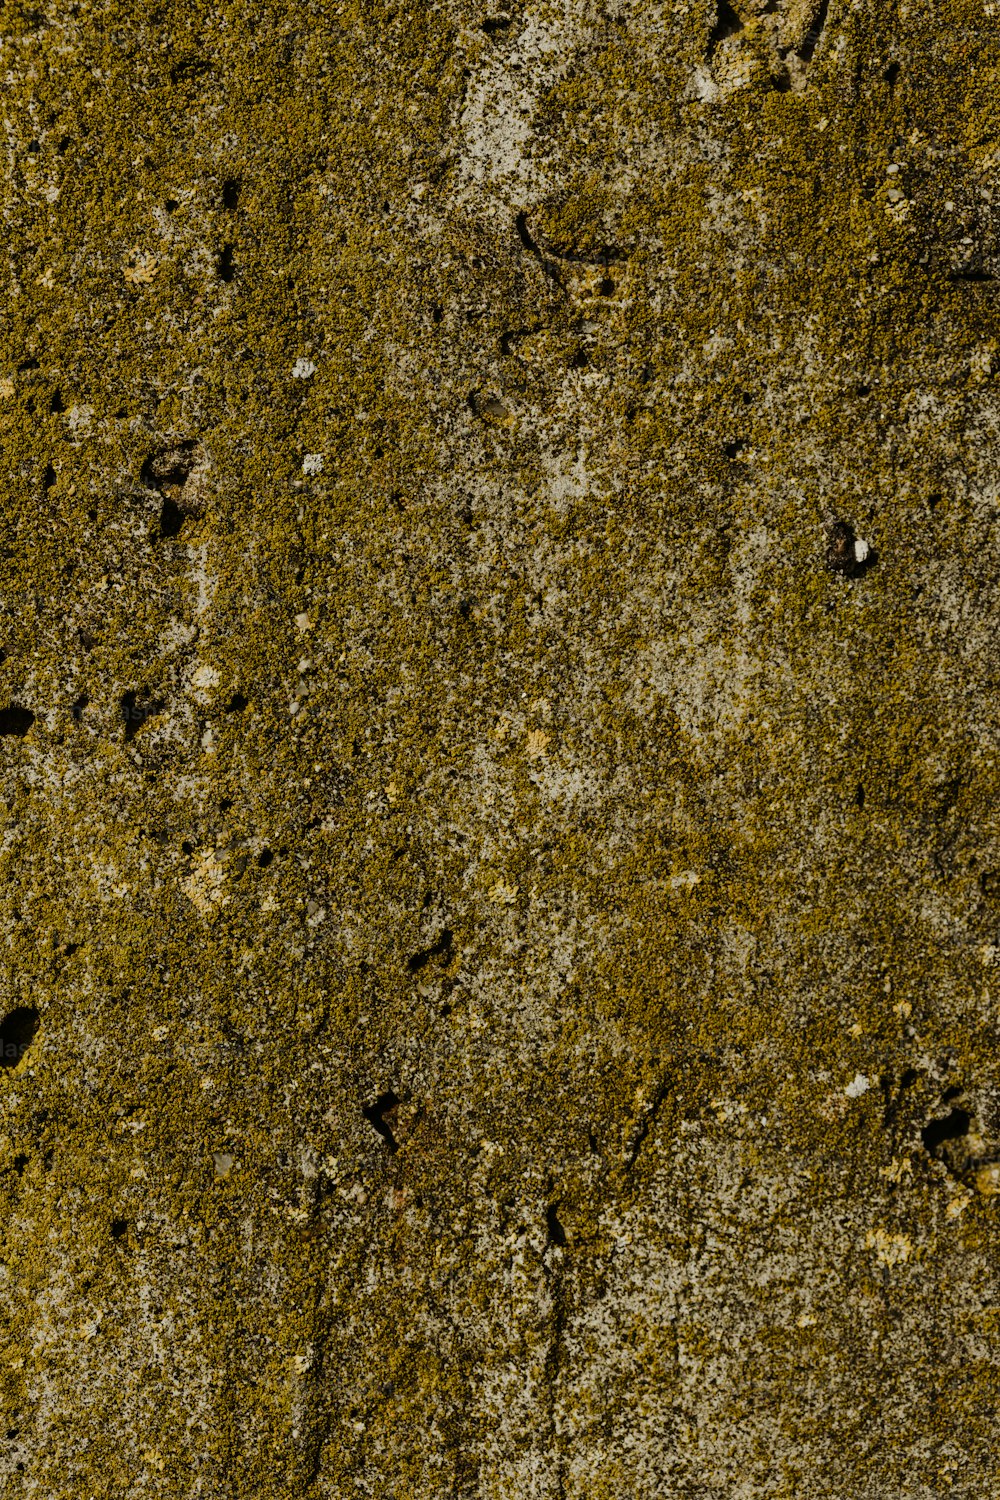 a close up of a concrete surface with small cracks